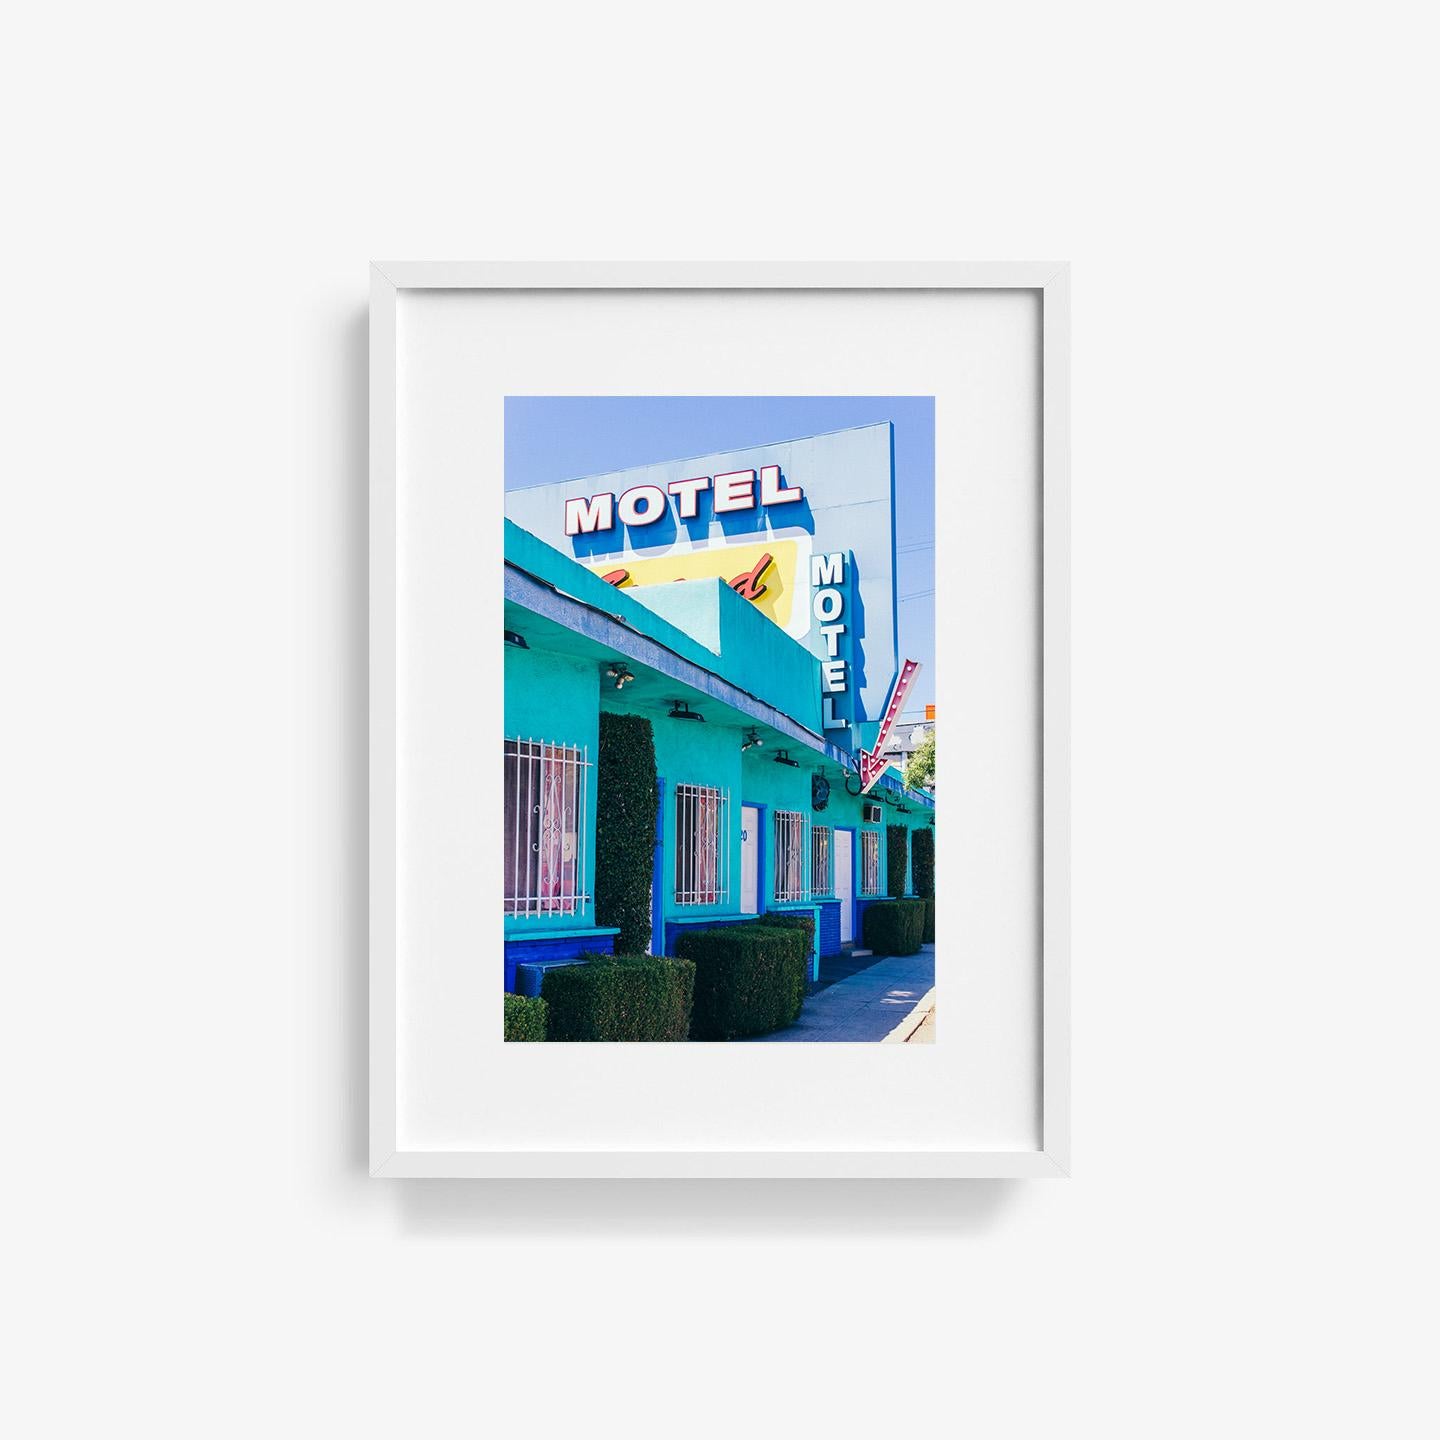 Motel - Photograph by Nicoline Aagesen